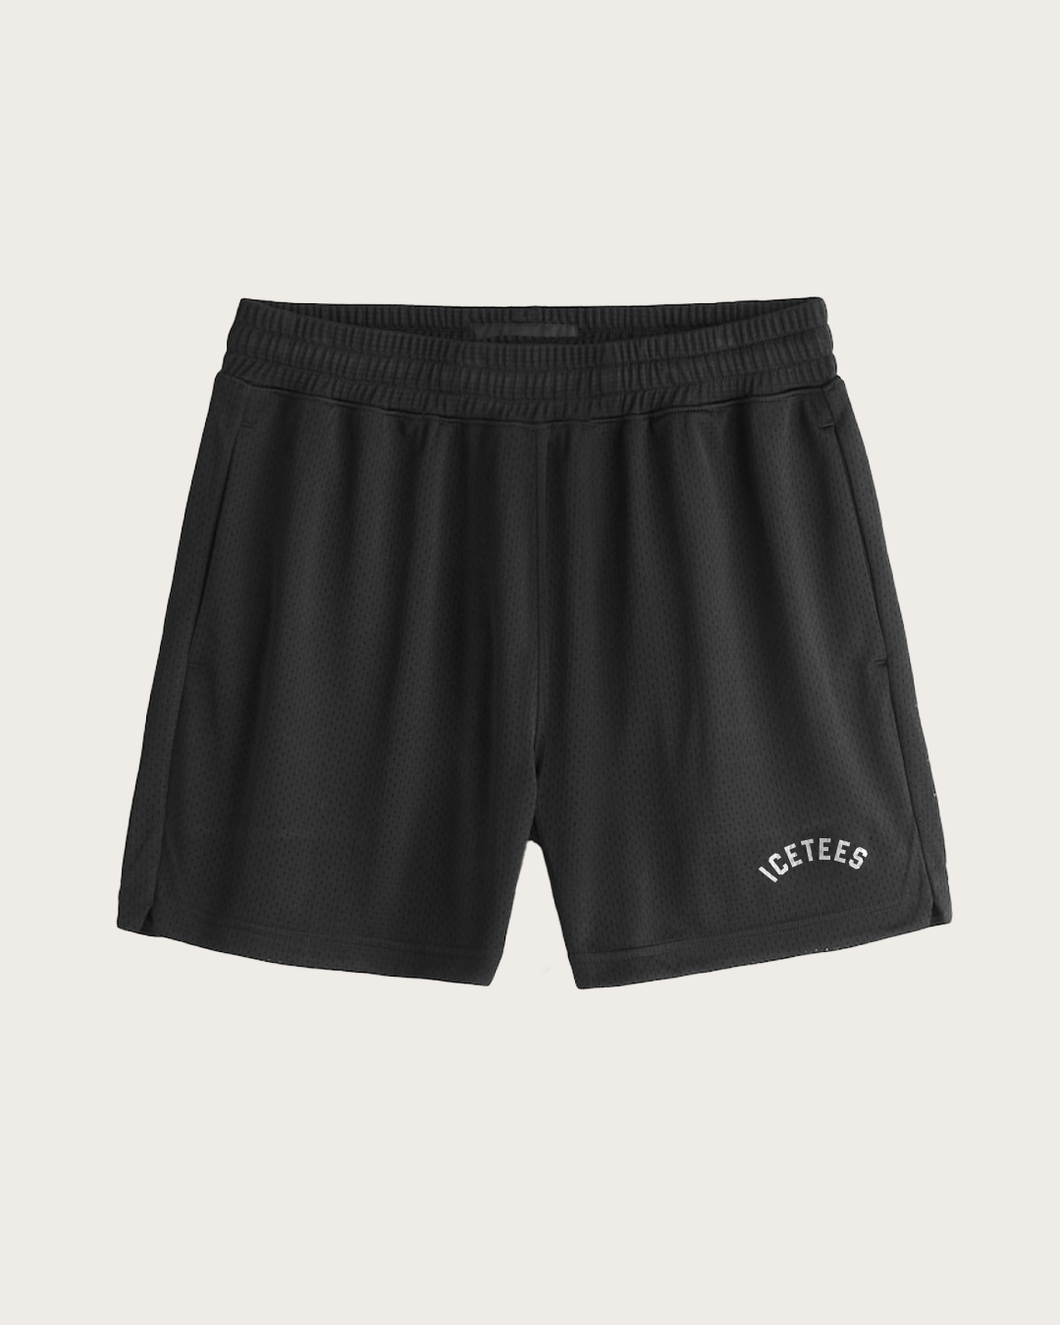 Icetees Mesh Shorts